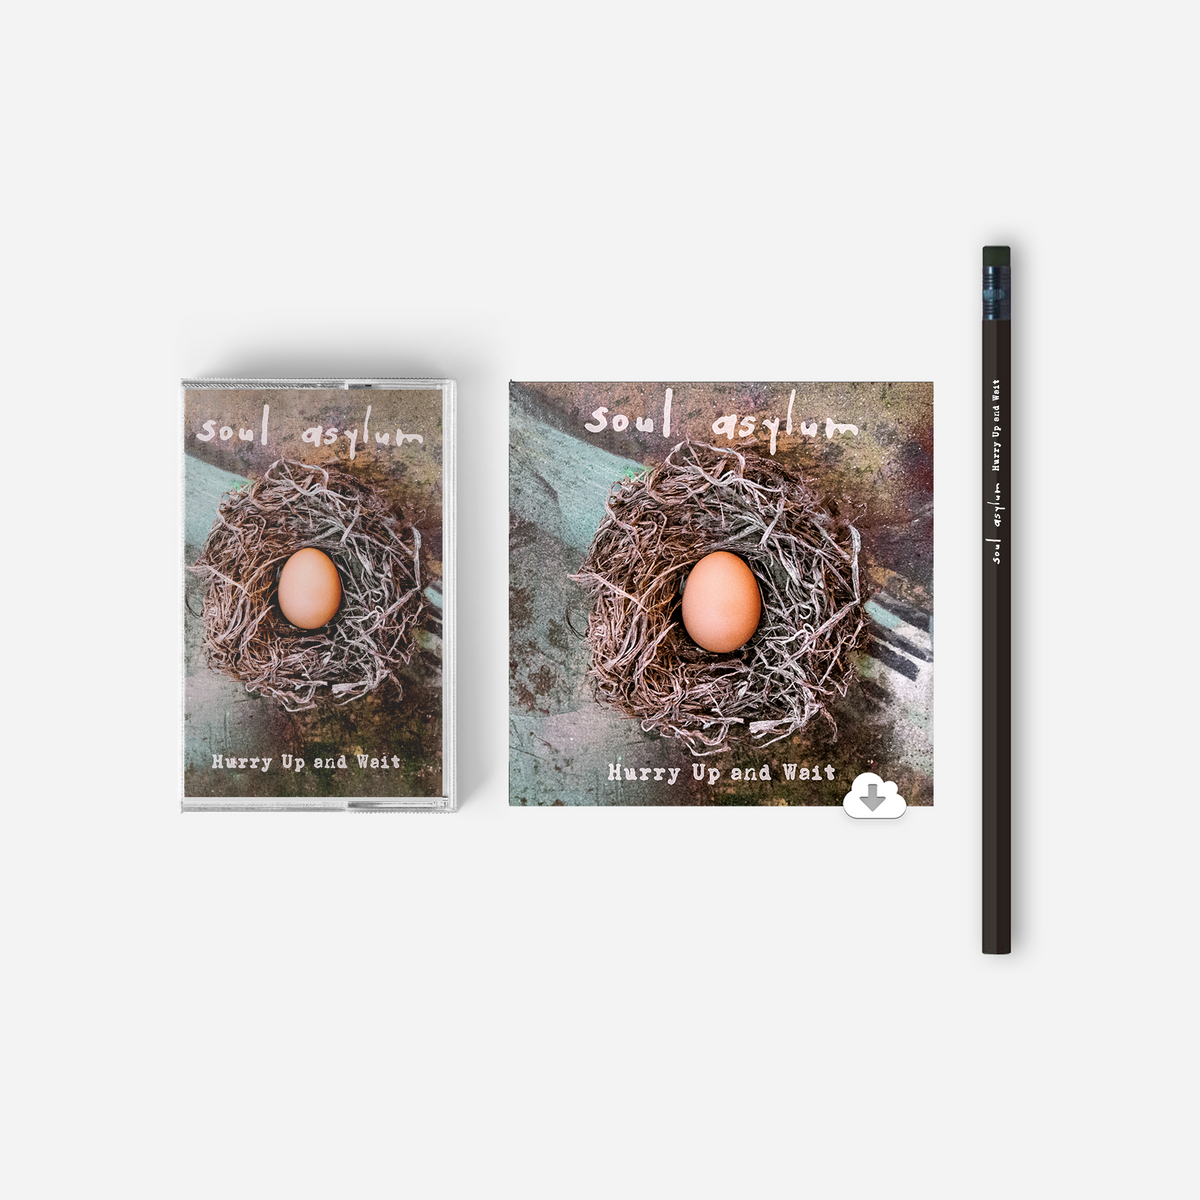 Hurry Up and Wait - Limited Edition Cassette + Pencil